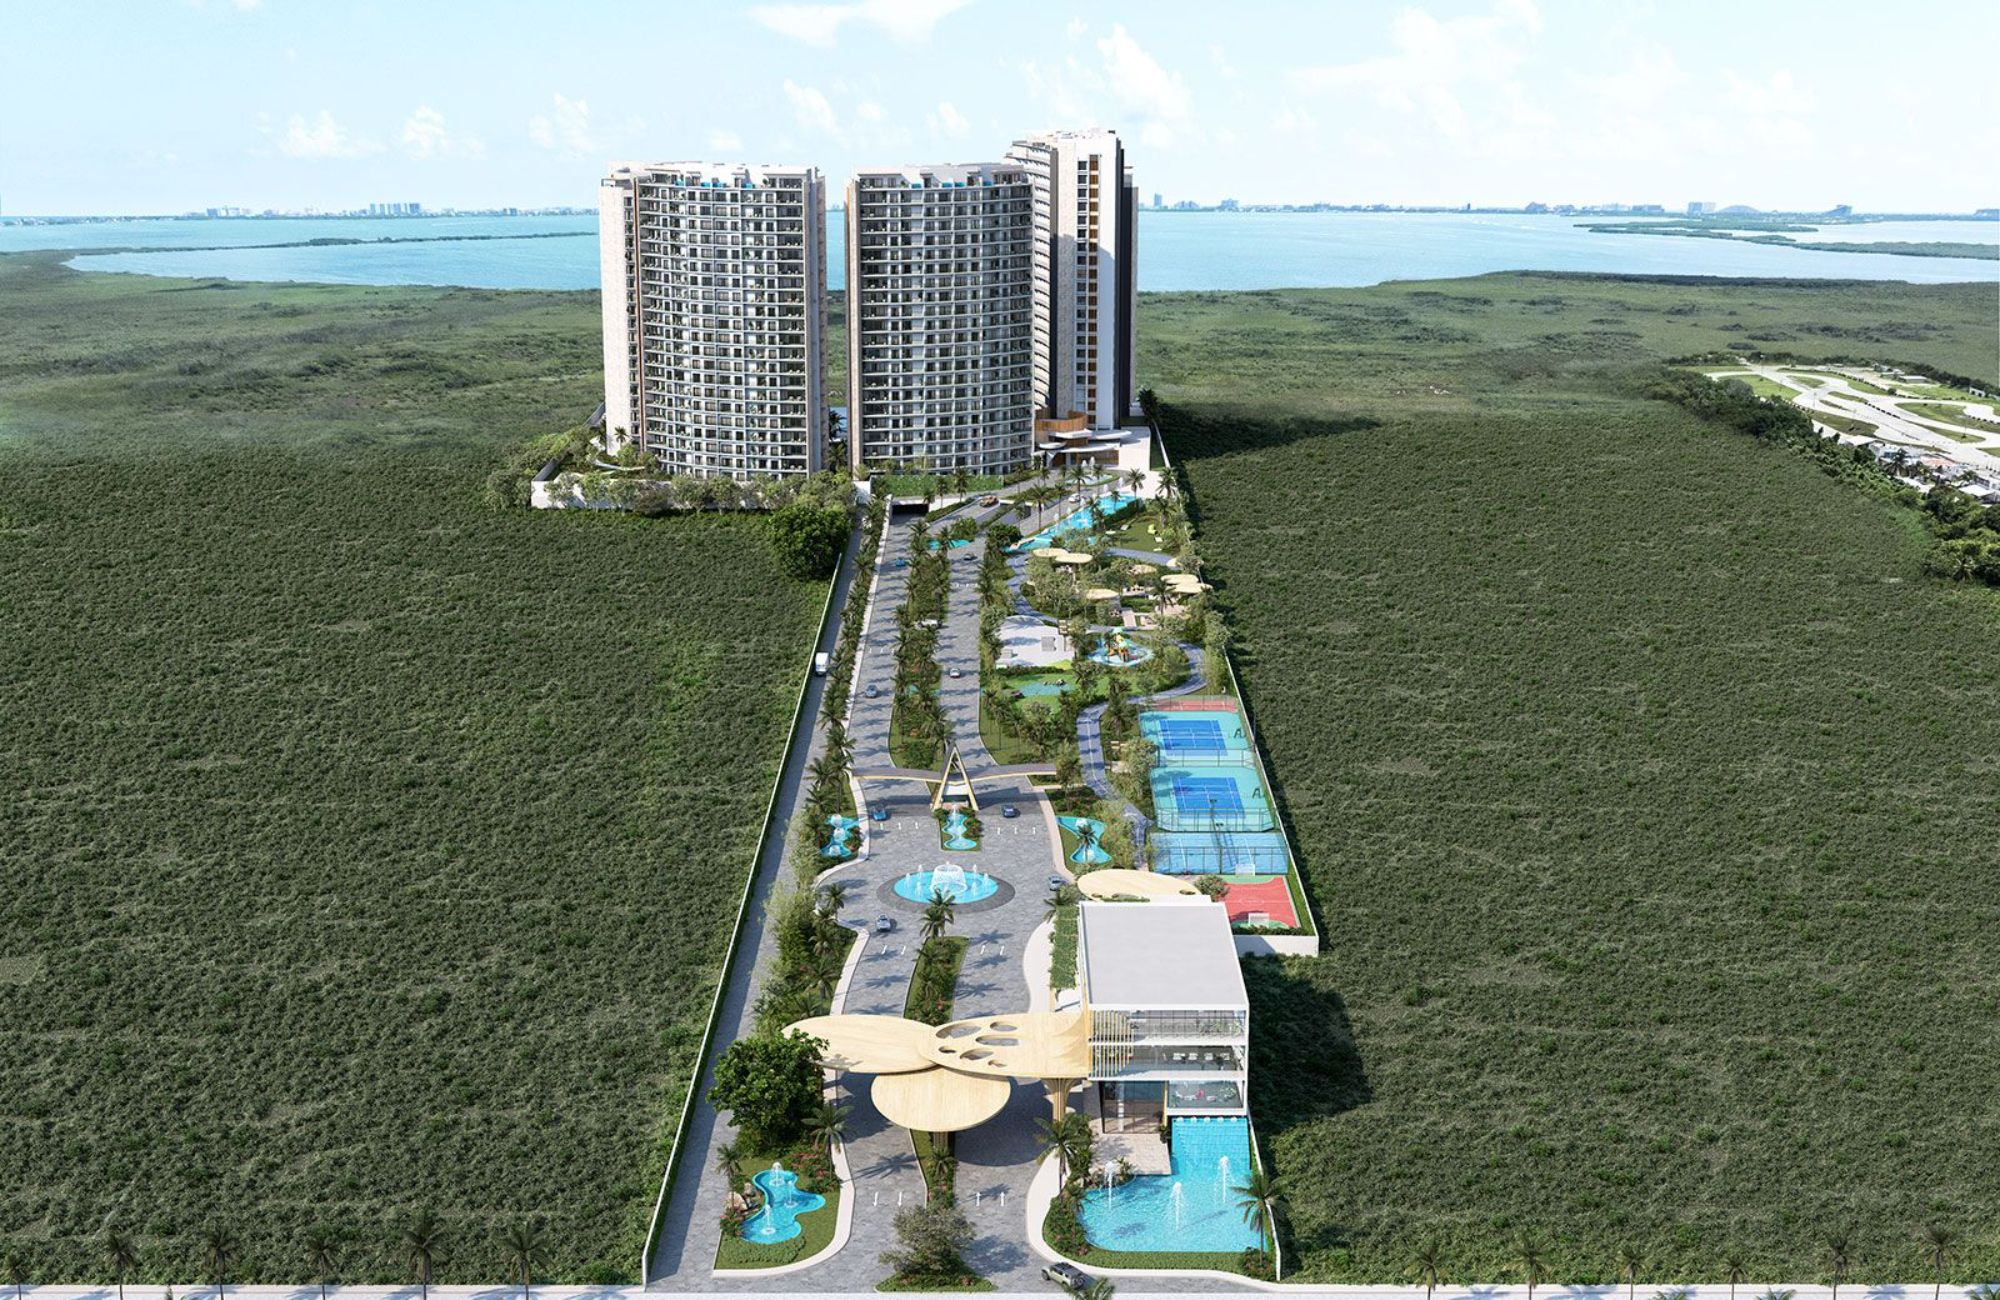 Apartment with terrace, Pool, Jacuzzi and more amenities for sale, Hotel Las Americas, Cancun.